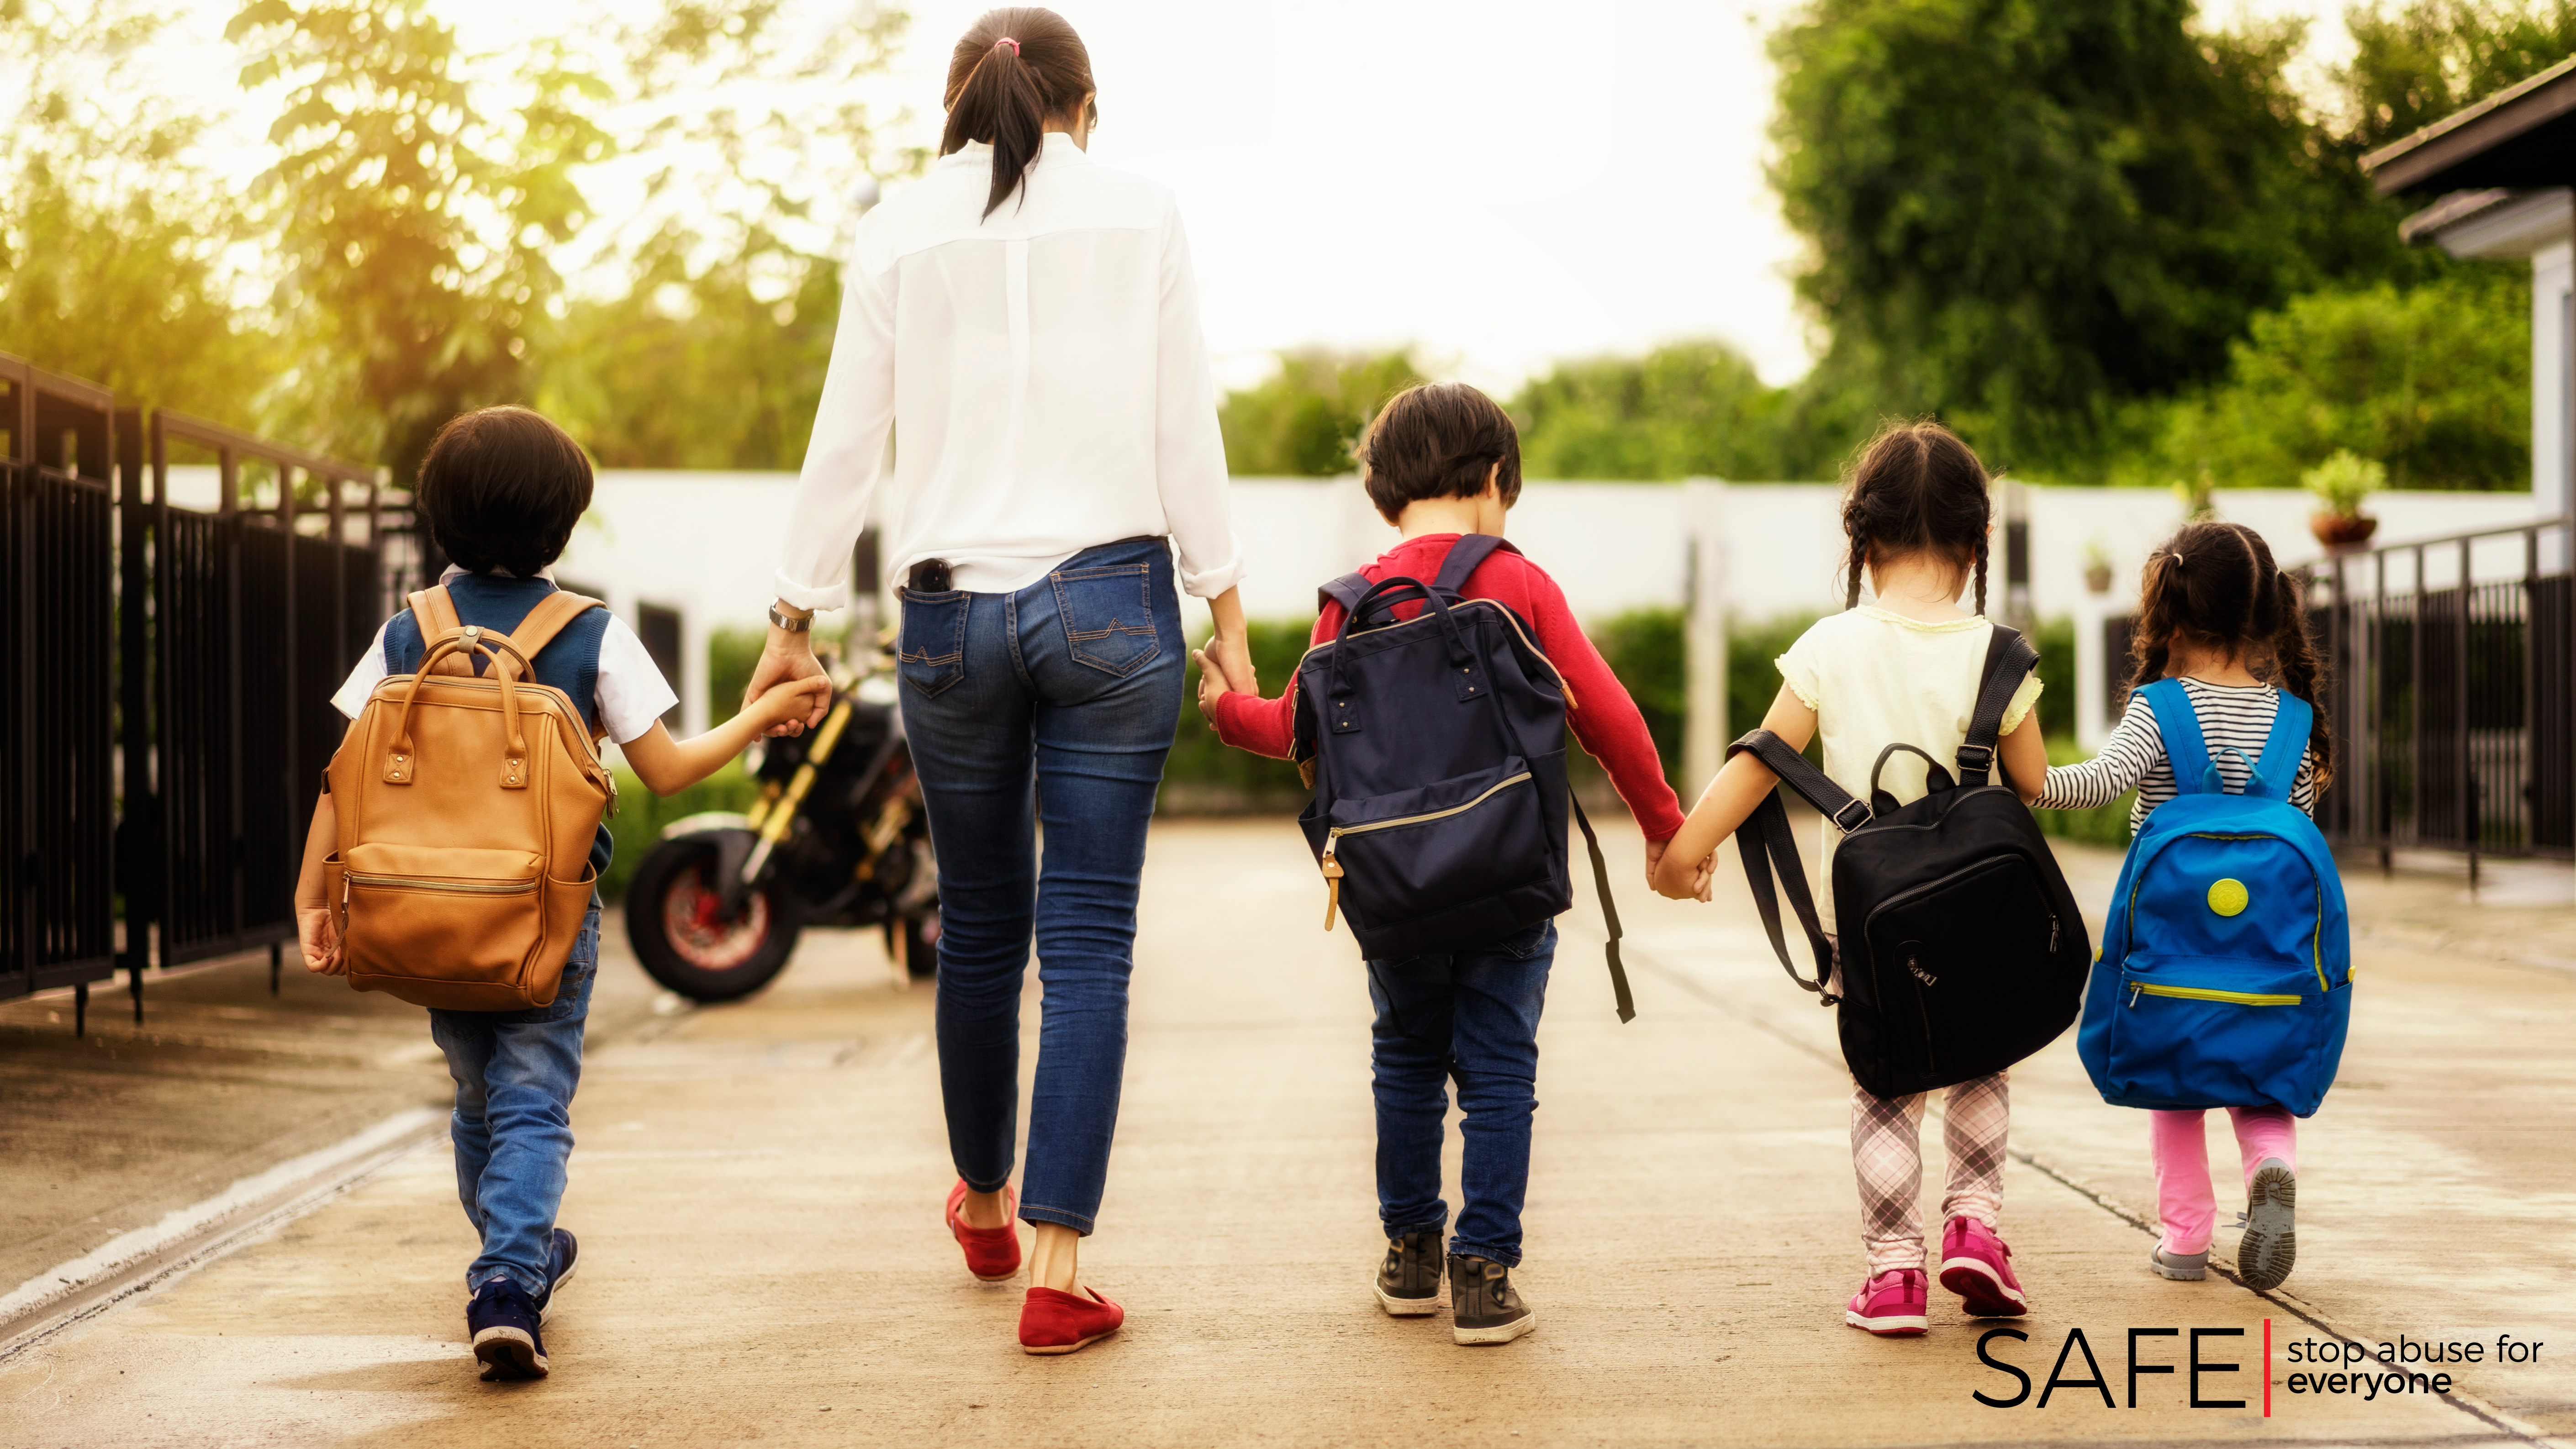 Image description: A stock photograph of a woman and four children walking. They are all holding hands. Their backs are facing the camera.